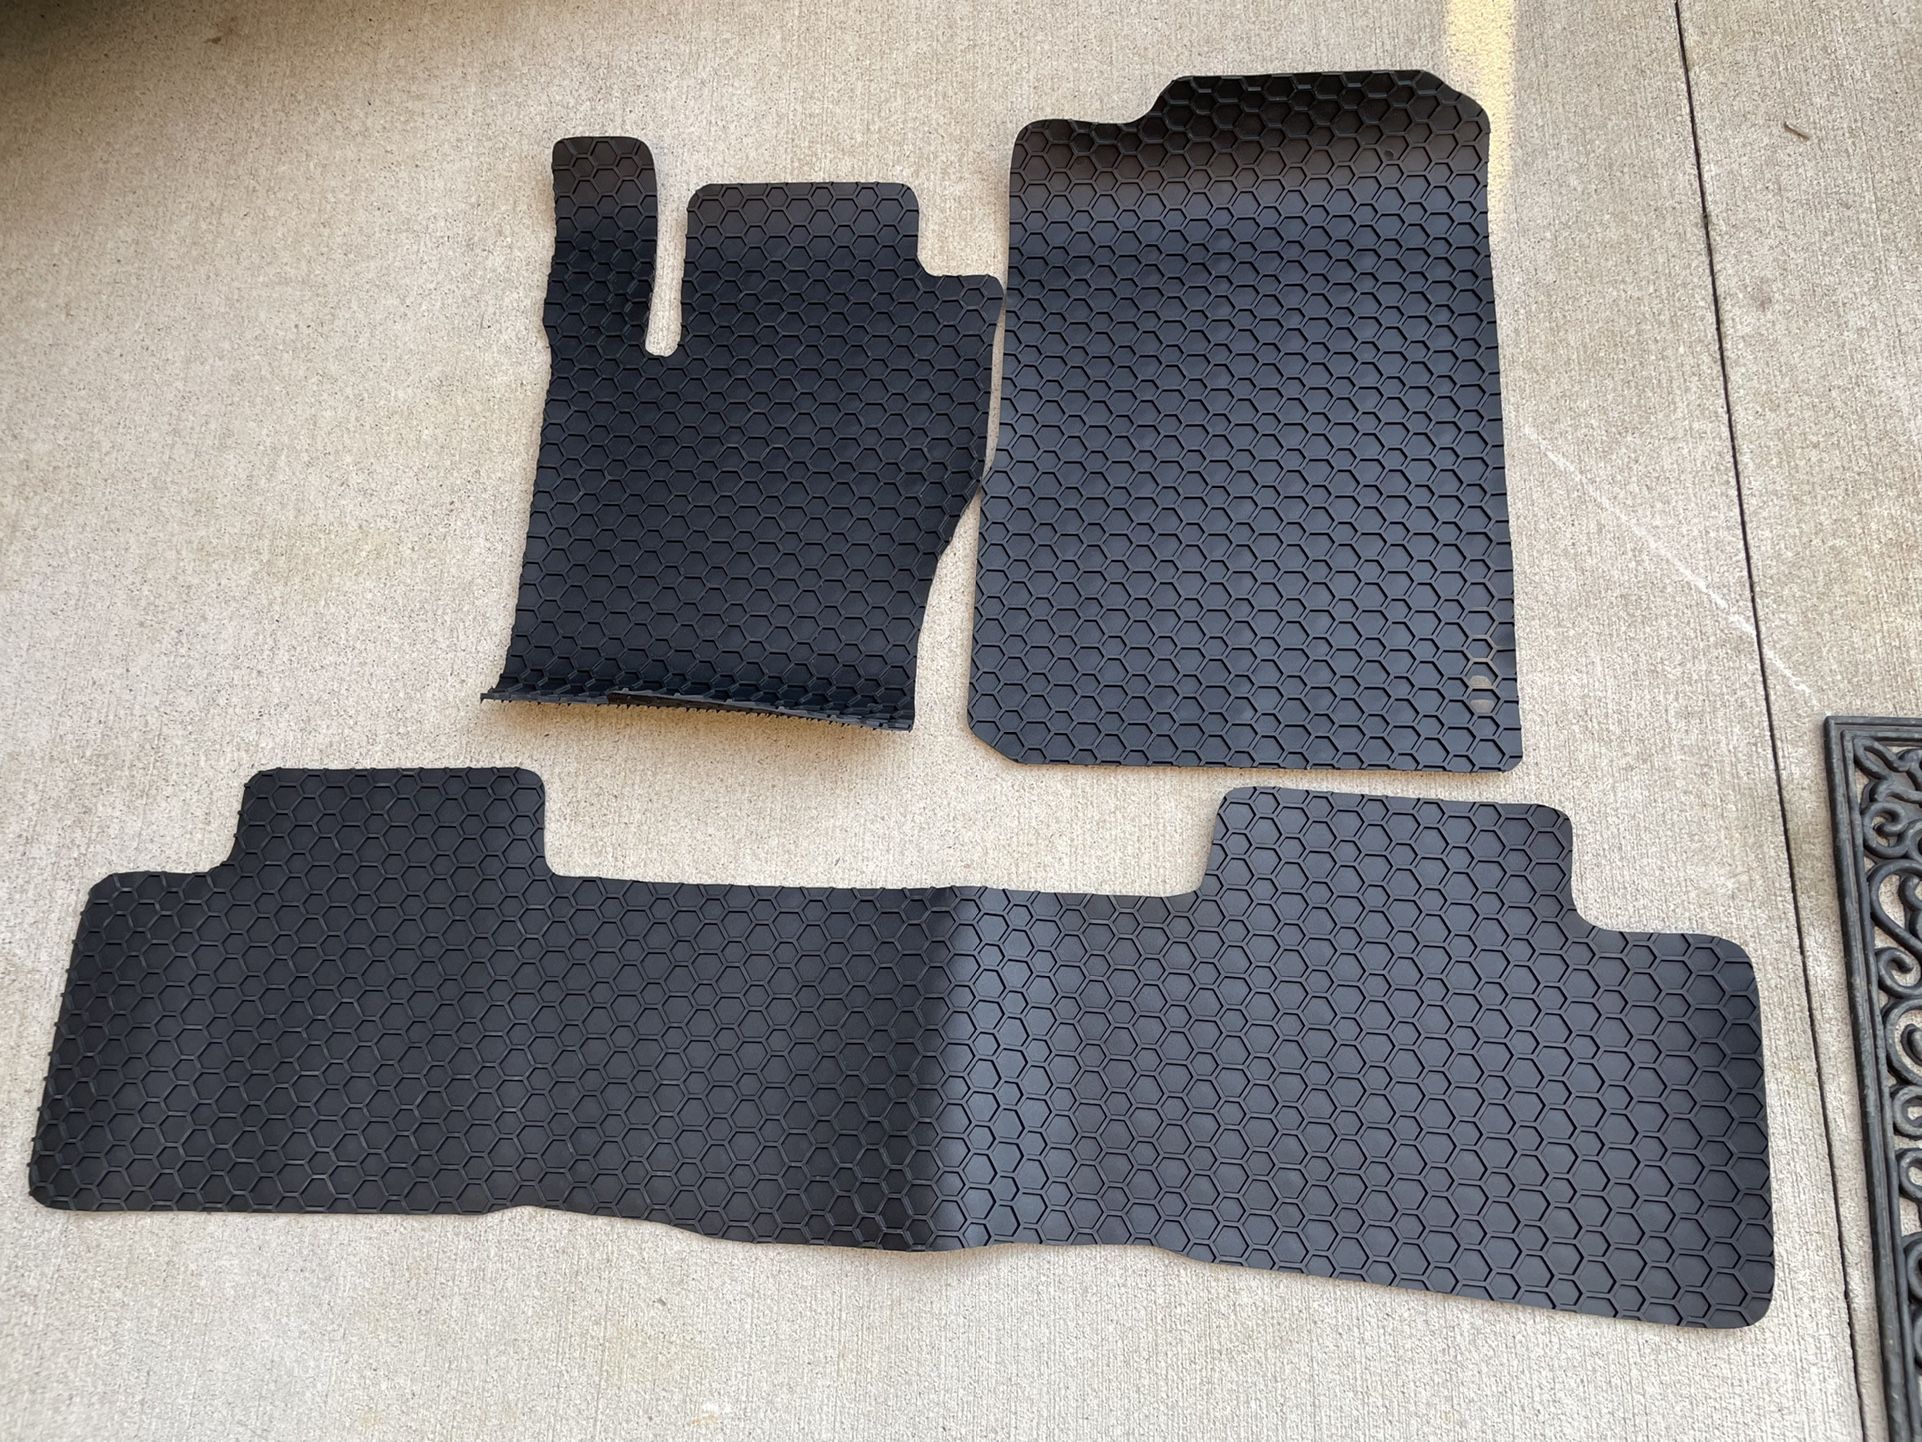 ToughPro Rubber Floor Mats For Mercedes ML GLE 2011-2018 1st and 2nd Row Of Seats Black